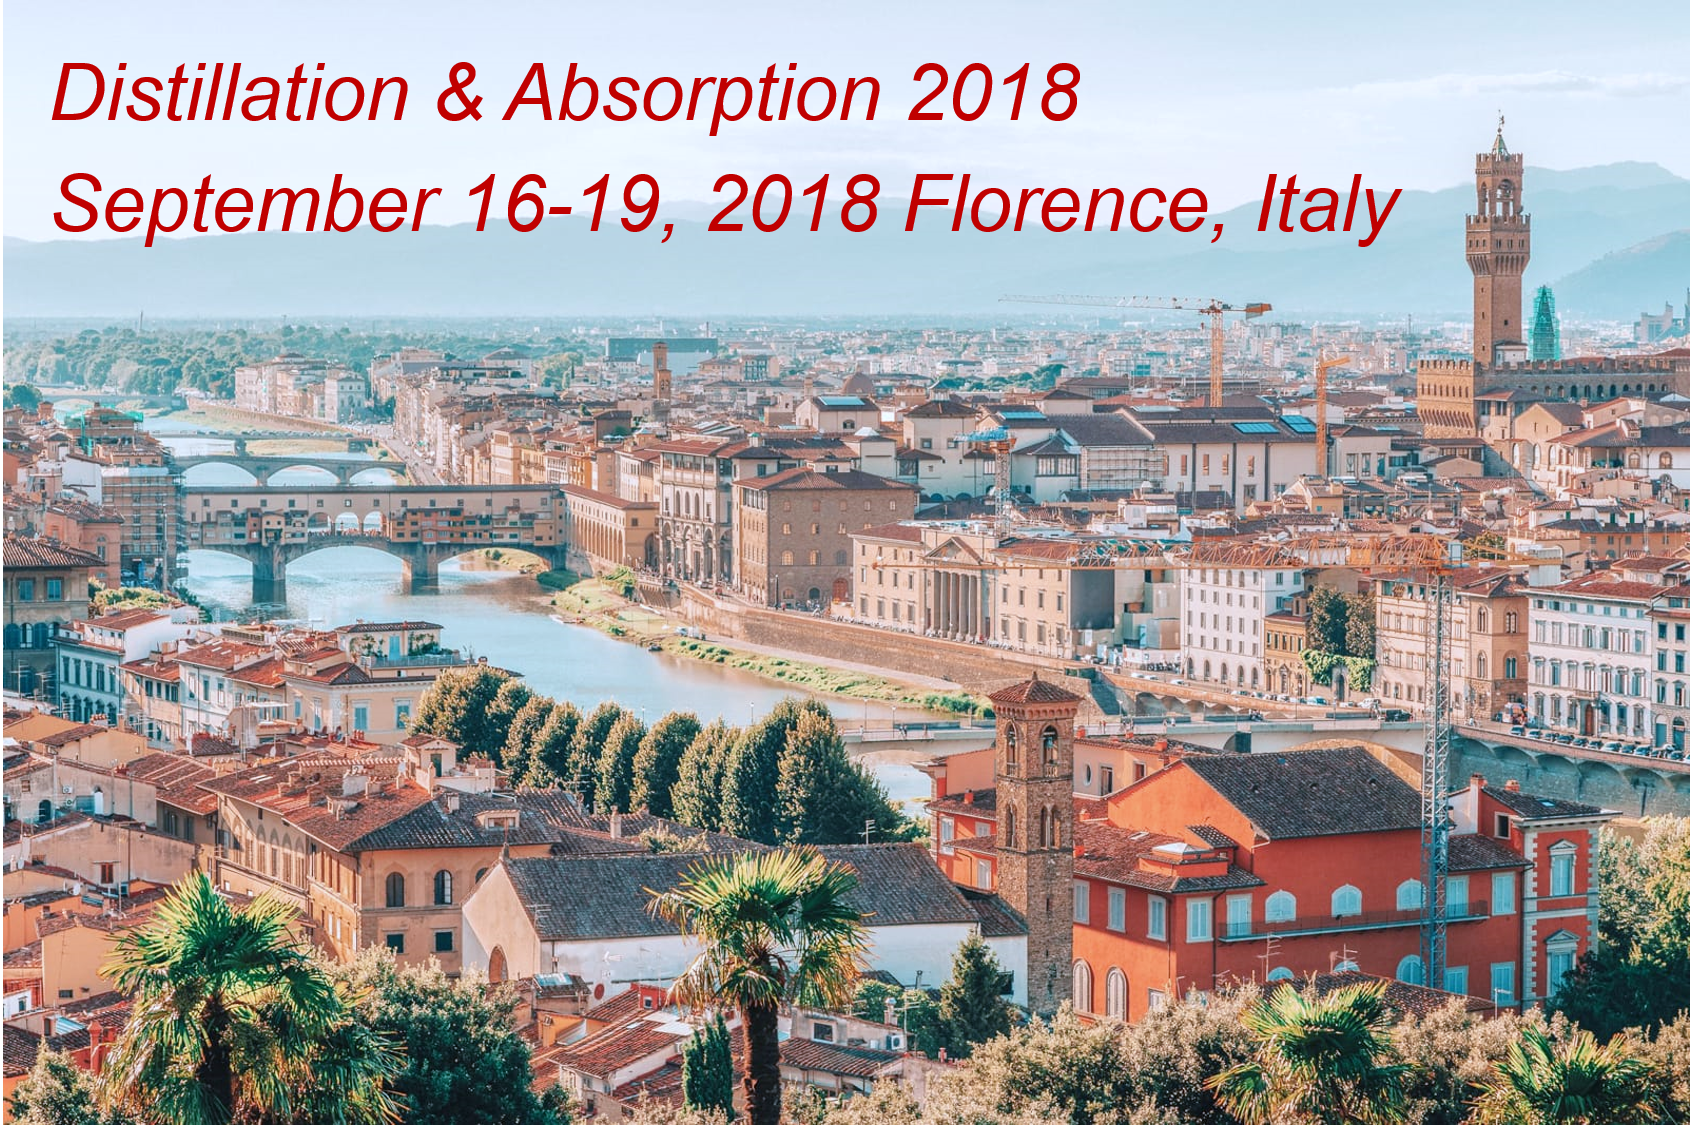 Benit M participated as the speaker and exhibitor in Distillation & Absorption 2018 Conference